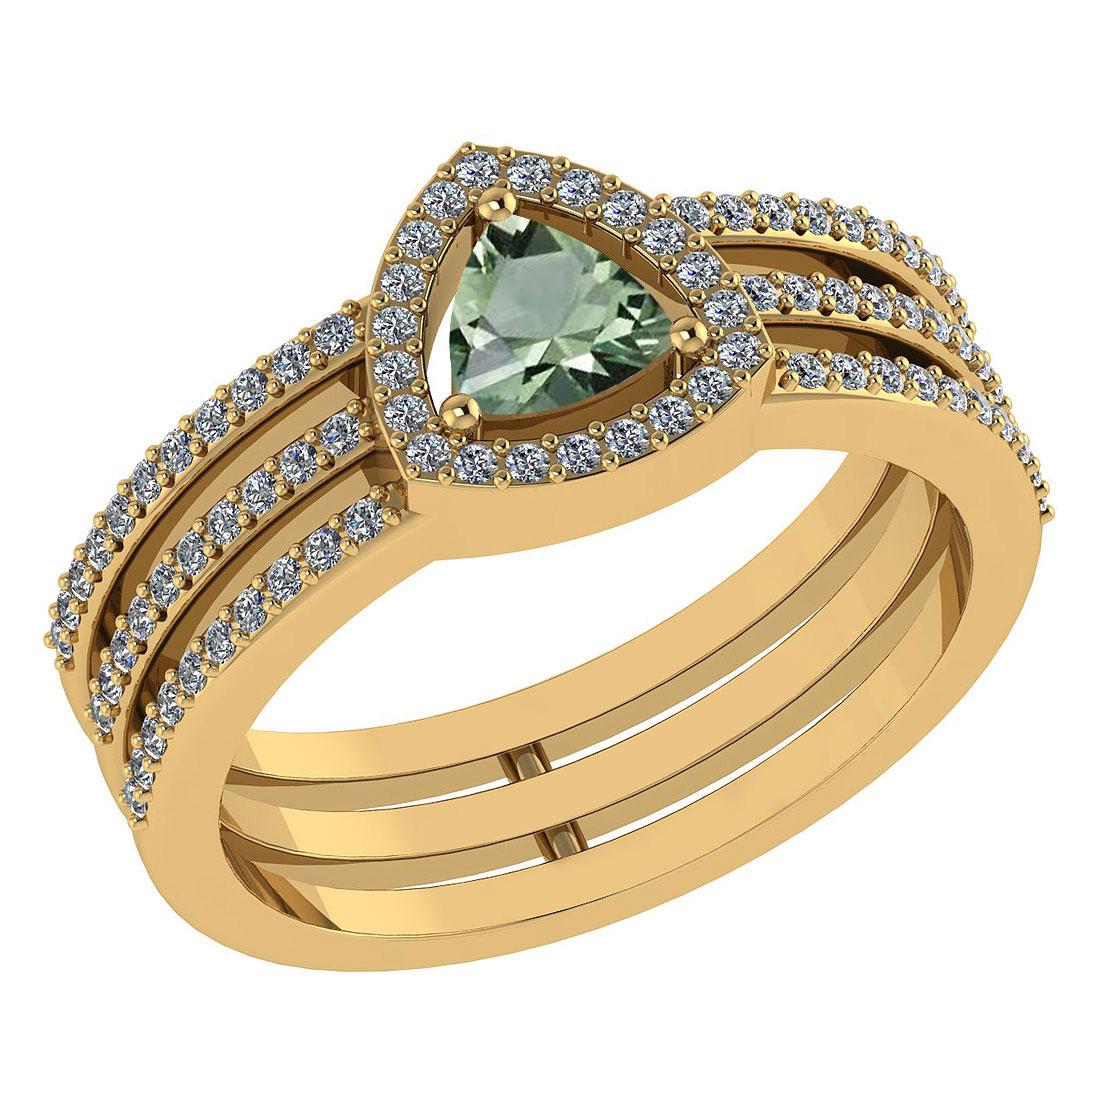 Certified 0.91 Ctw Green Amethyst And Diamond 14k Rose Gold Halo Anniversary Ring Made In USA